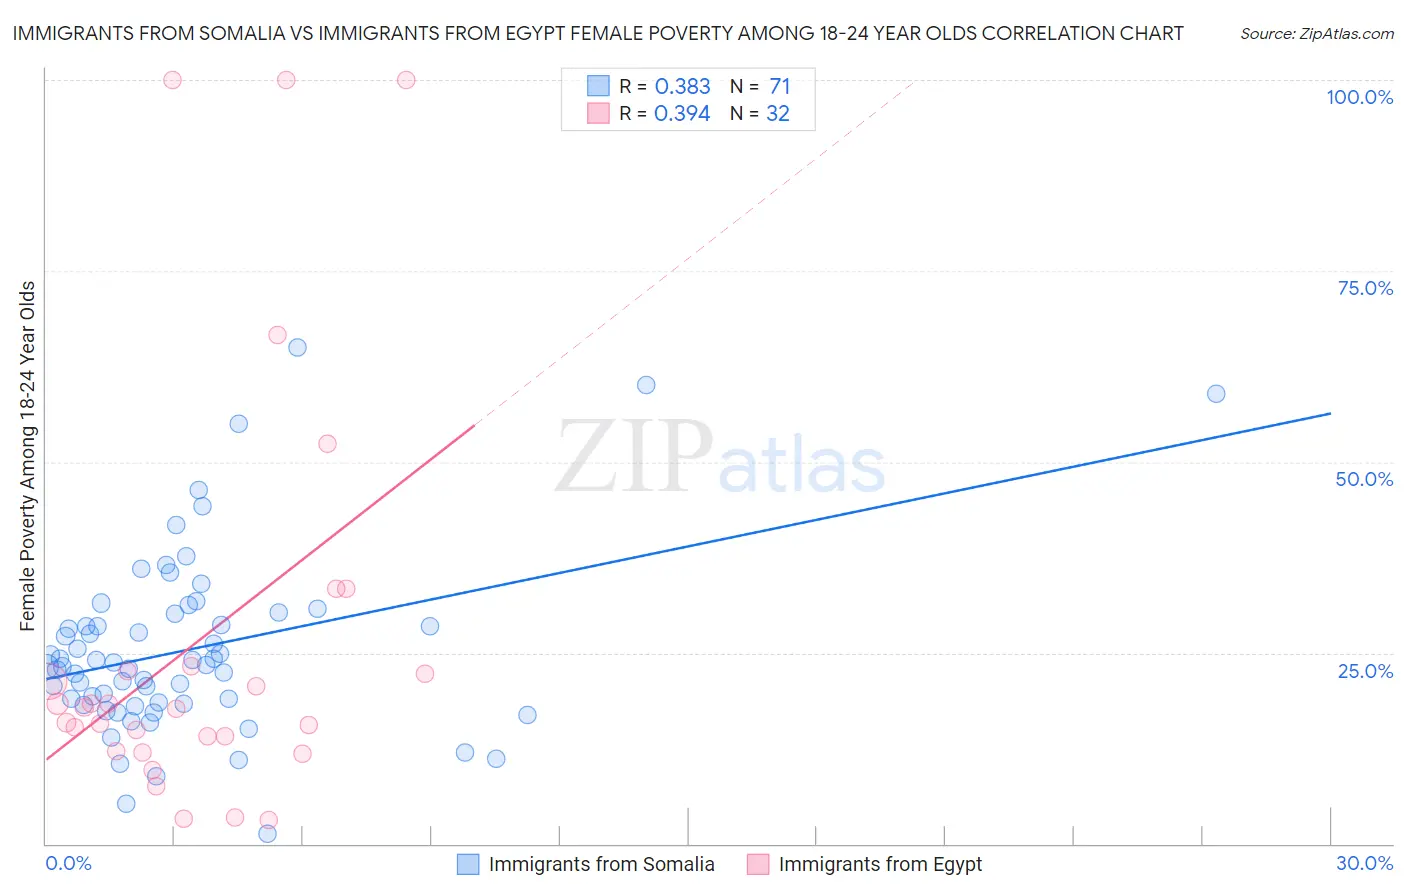 Immigrants from Somalia vs Immigrants from Egypt Female Poverty Among 18-24 Year Olds